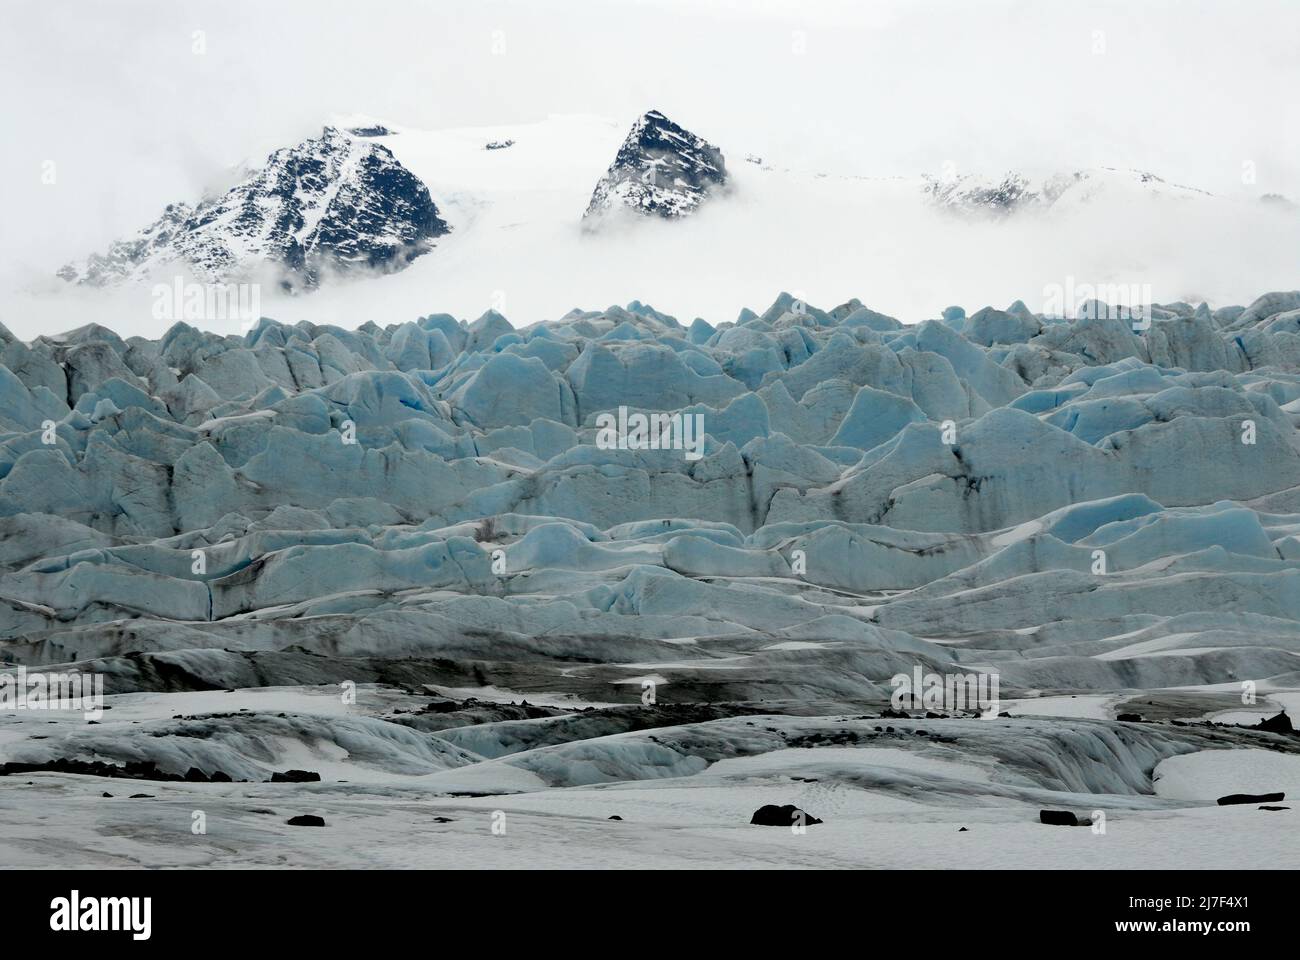 Mendenhall Glacier, near Juneau, is a popular location for adventure tourism. Stock Photo